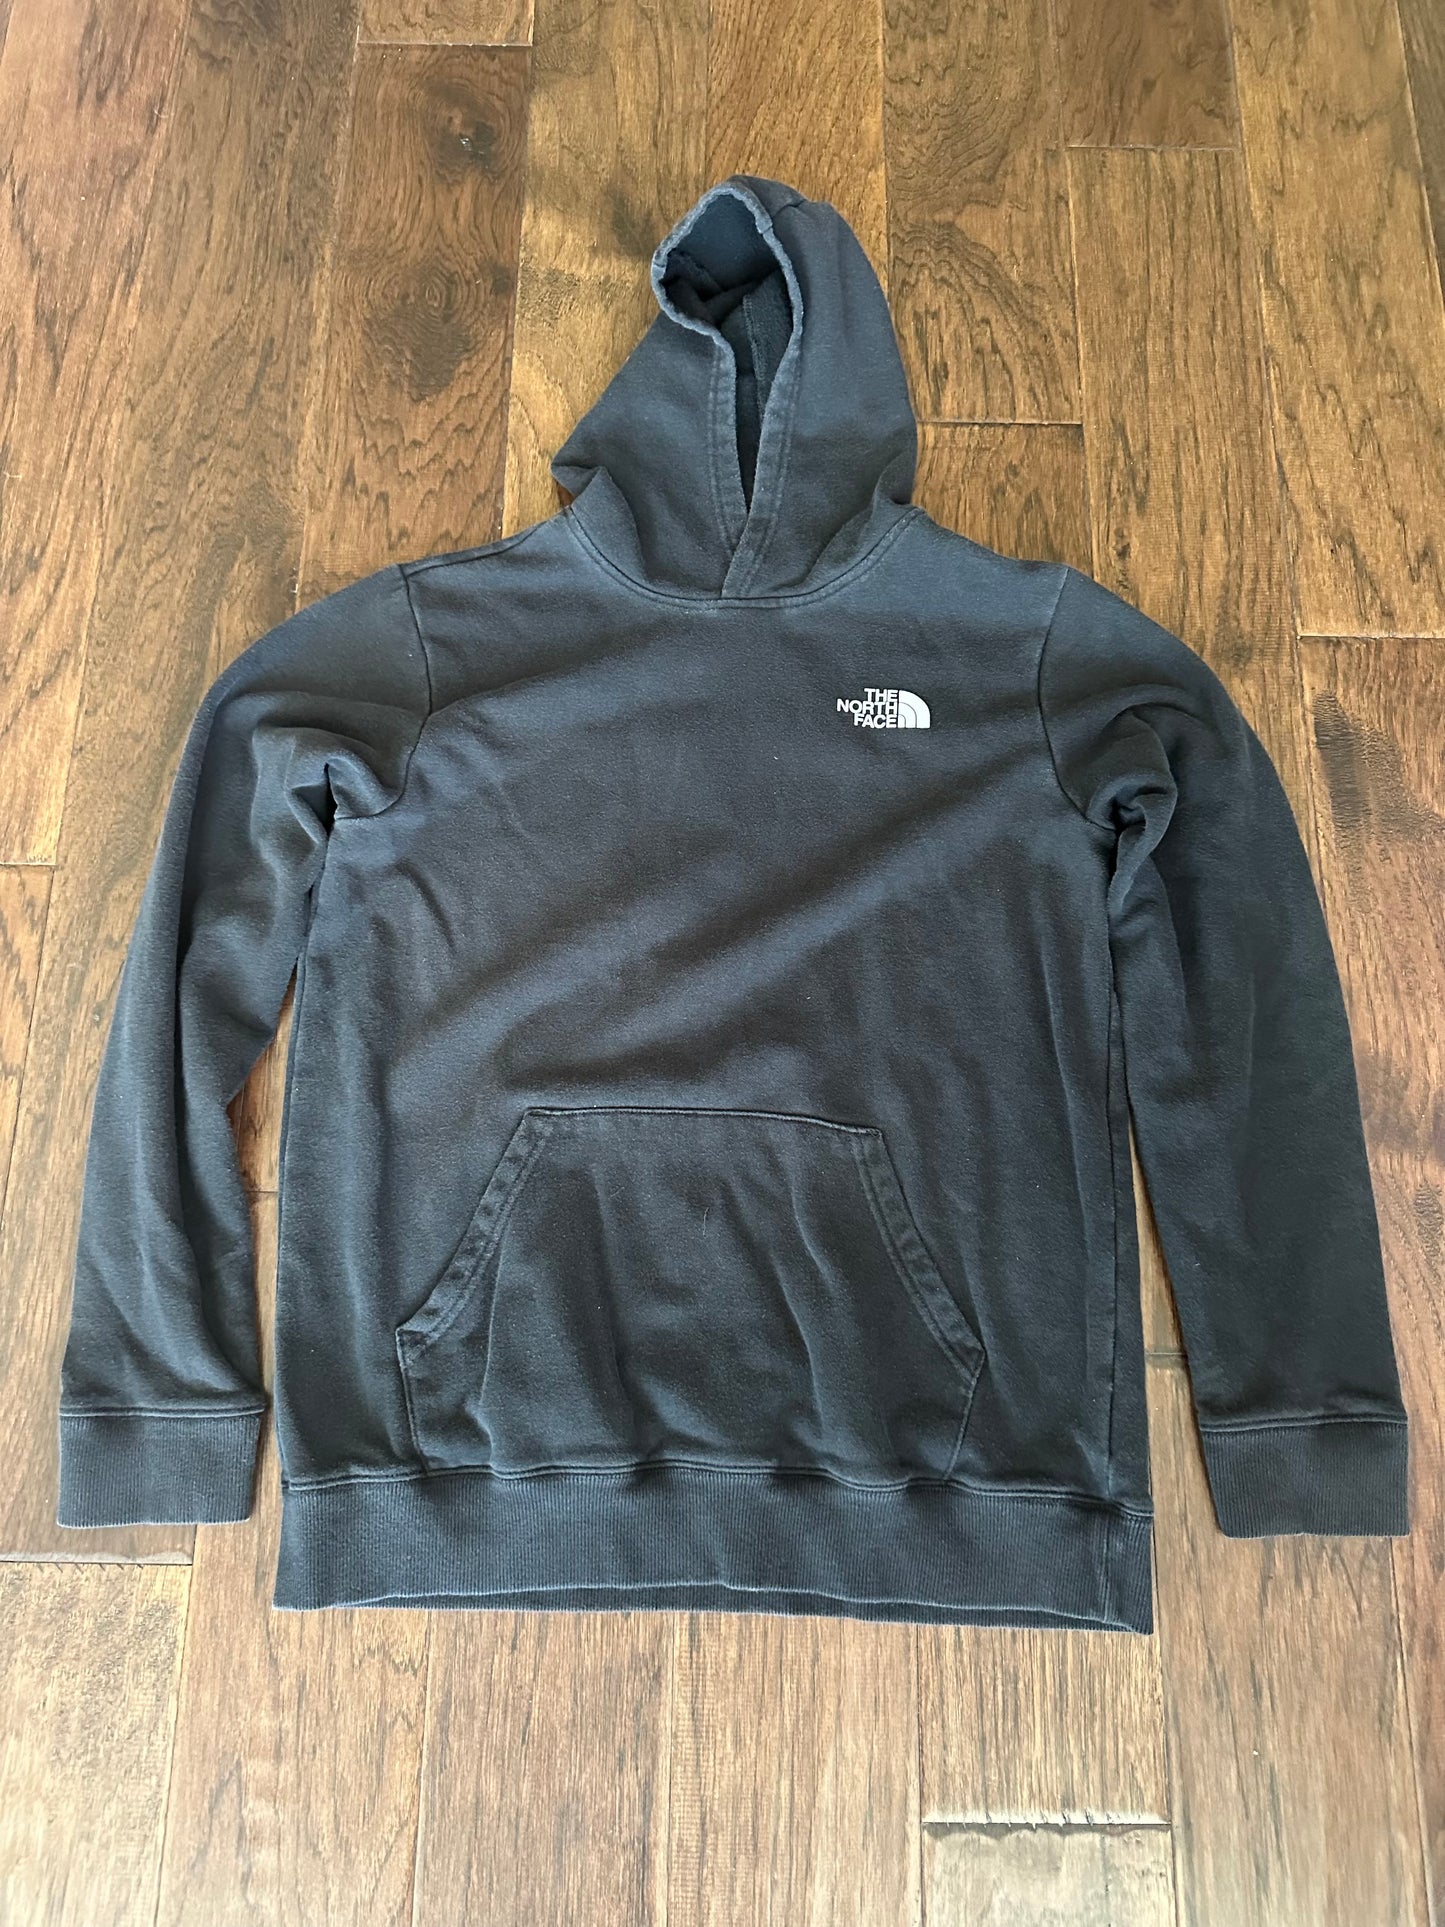 North Face - Black Hoodie - Youth XL